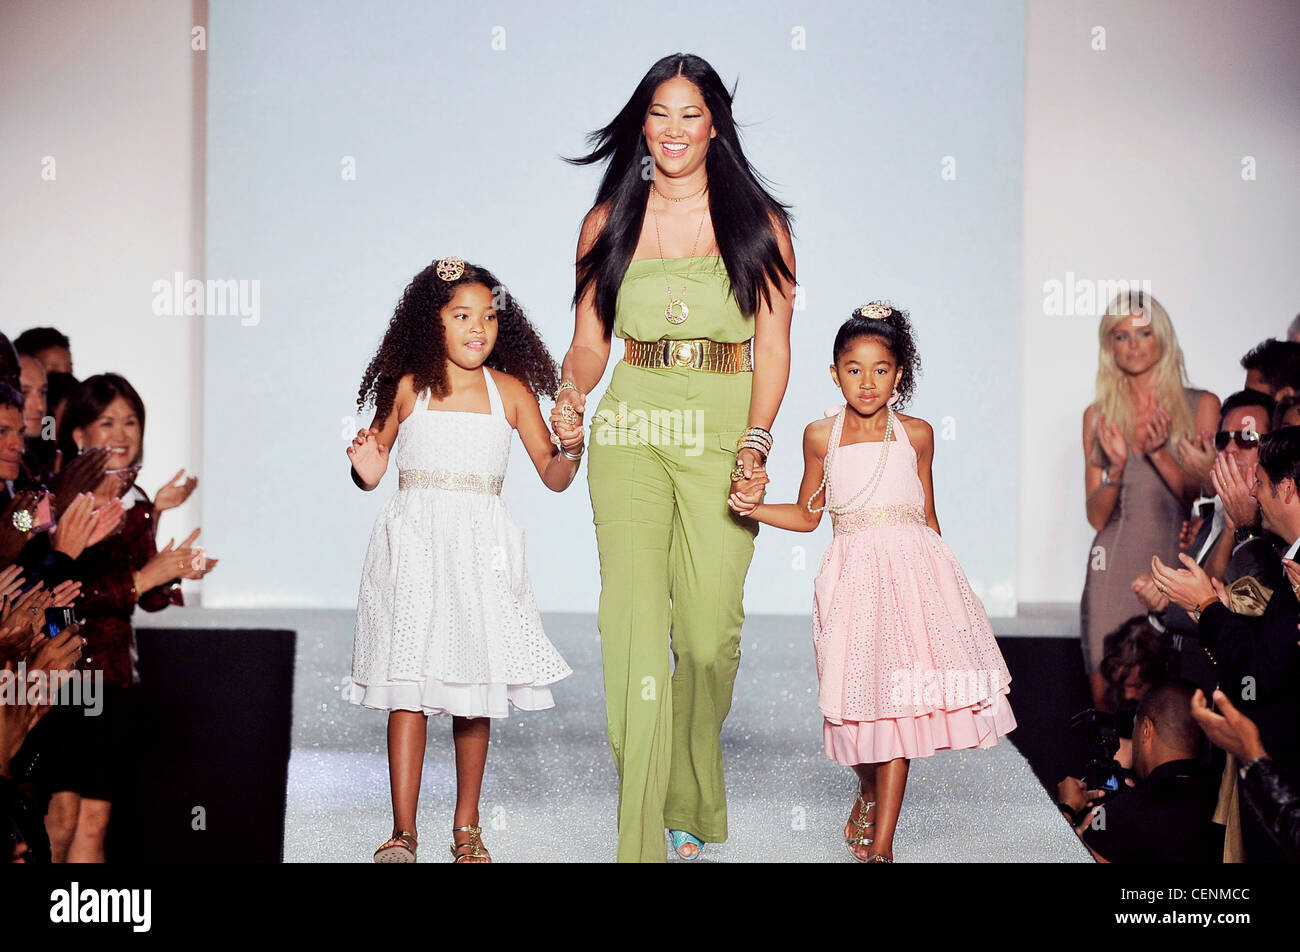 Baby Phat New York Ready to Wear Spring Summer Fashion designer Kimora Lee Simmons daughters Aoki Lee Simmons (left) and Ming Stock Photo